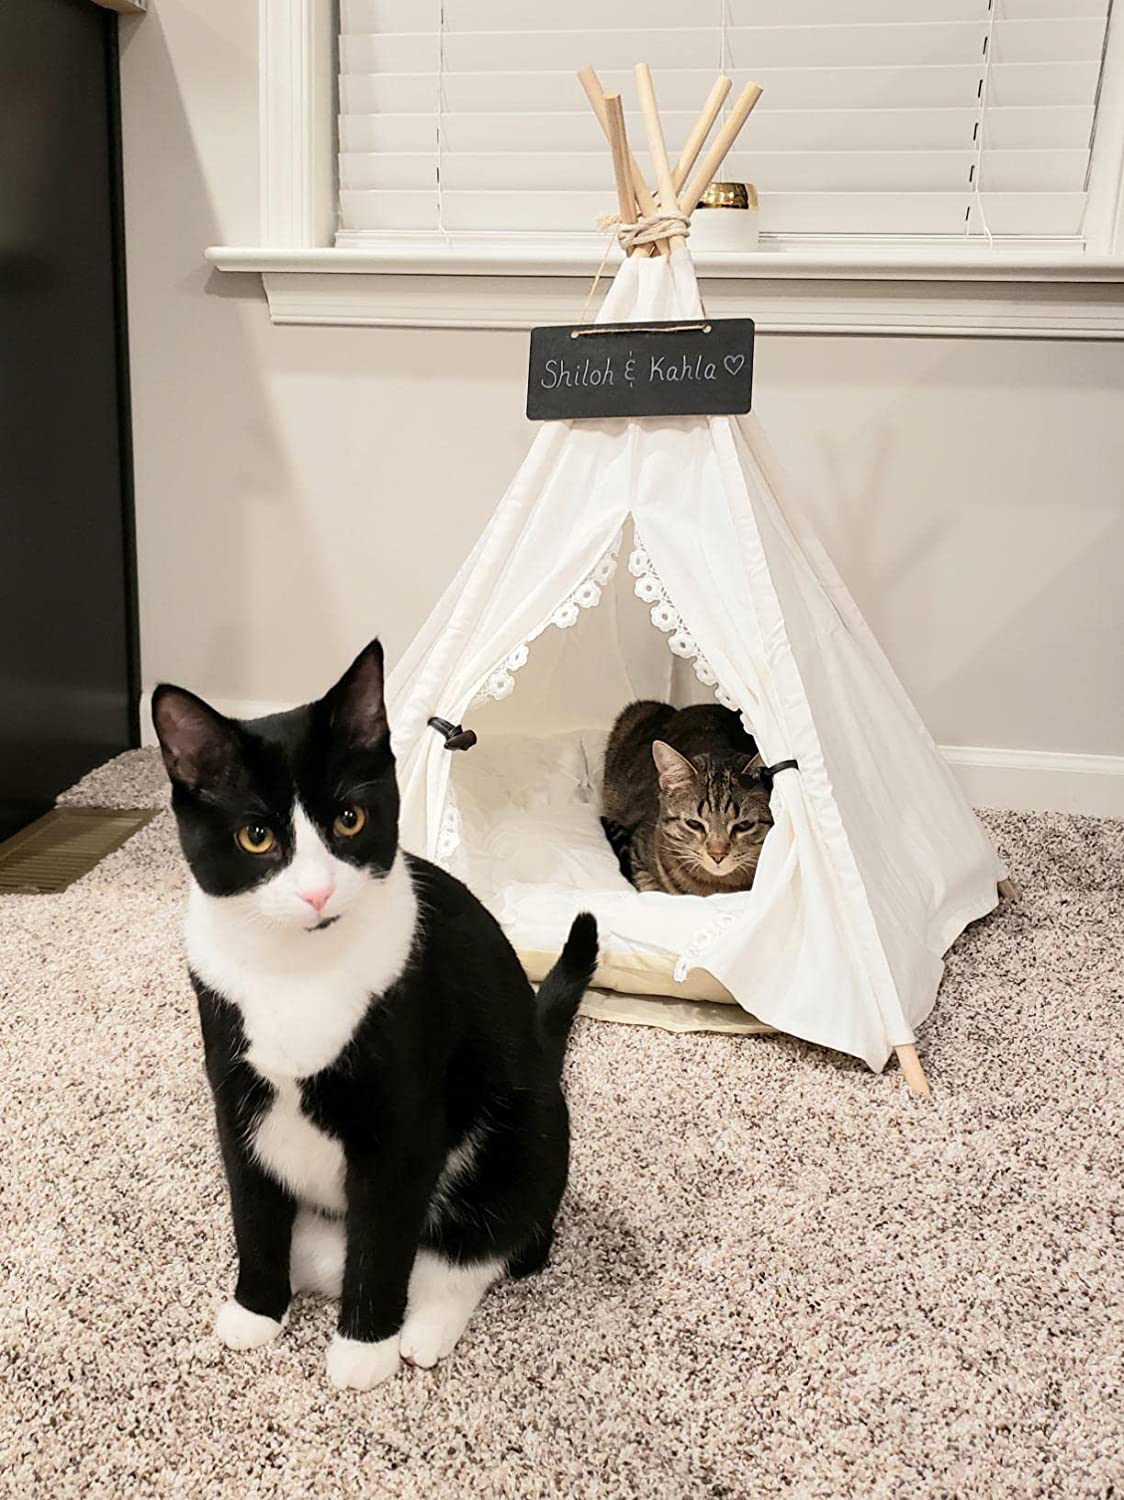 Penck Pet Teepee Dog & Cat Bed - Portable Dog Tents & Pet Houses with Thick Cushion & Blackboard, 24 Inch Tall, for Pets up to 15Lbs